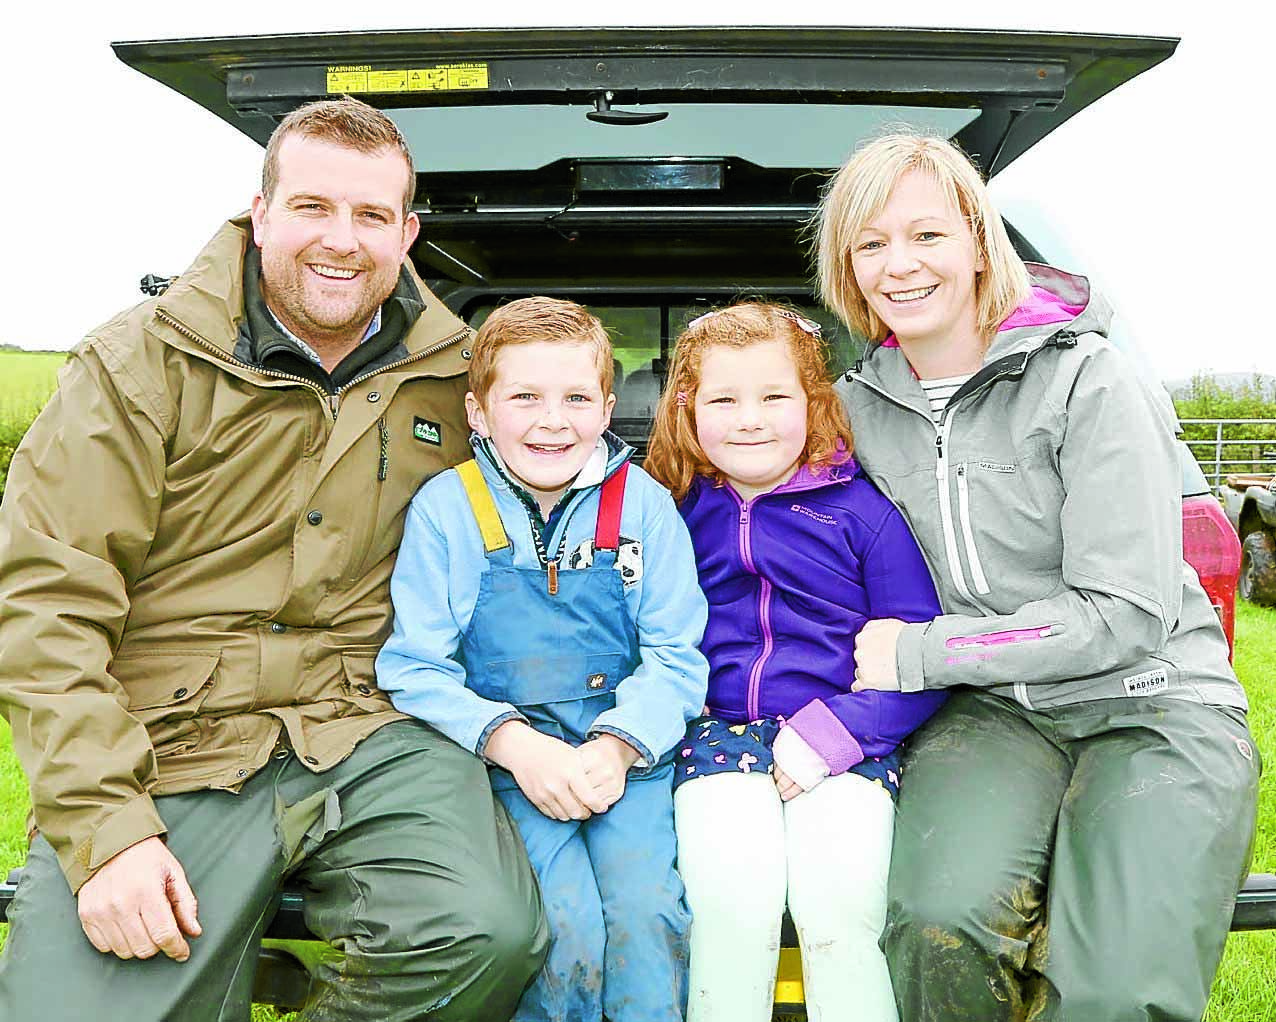 Family to share key learnings